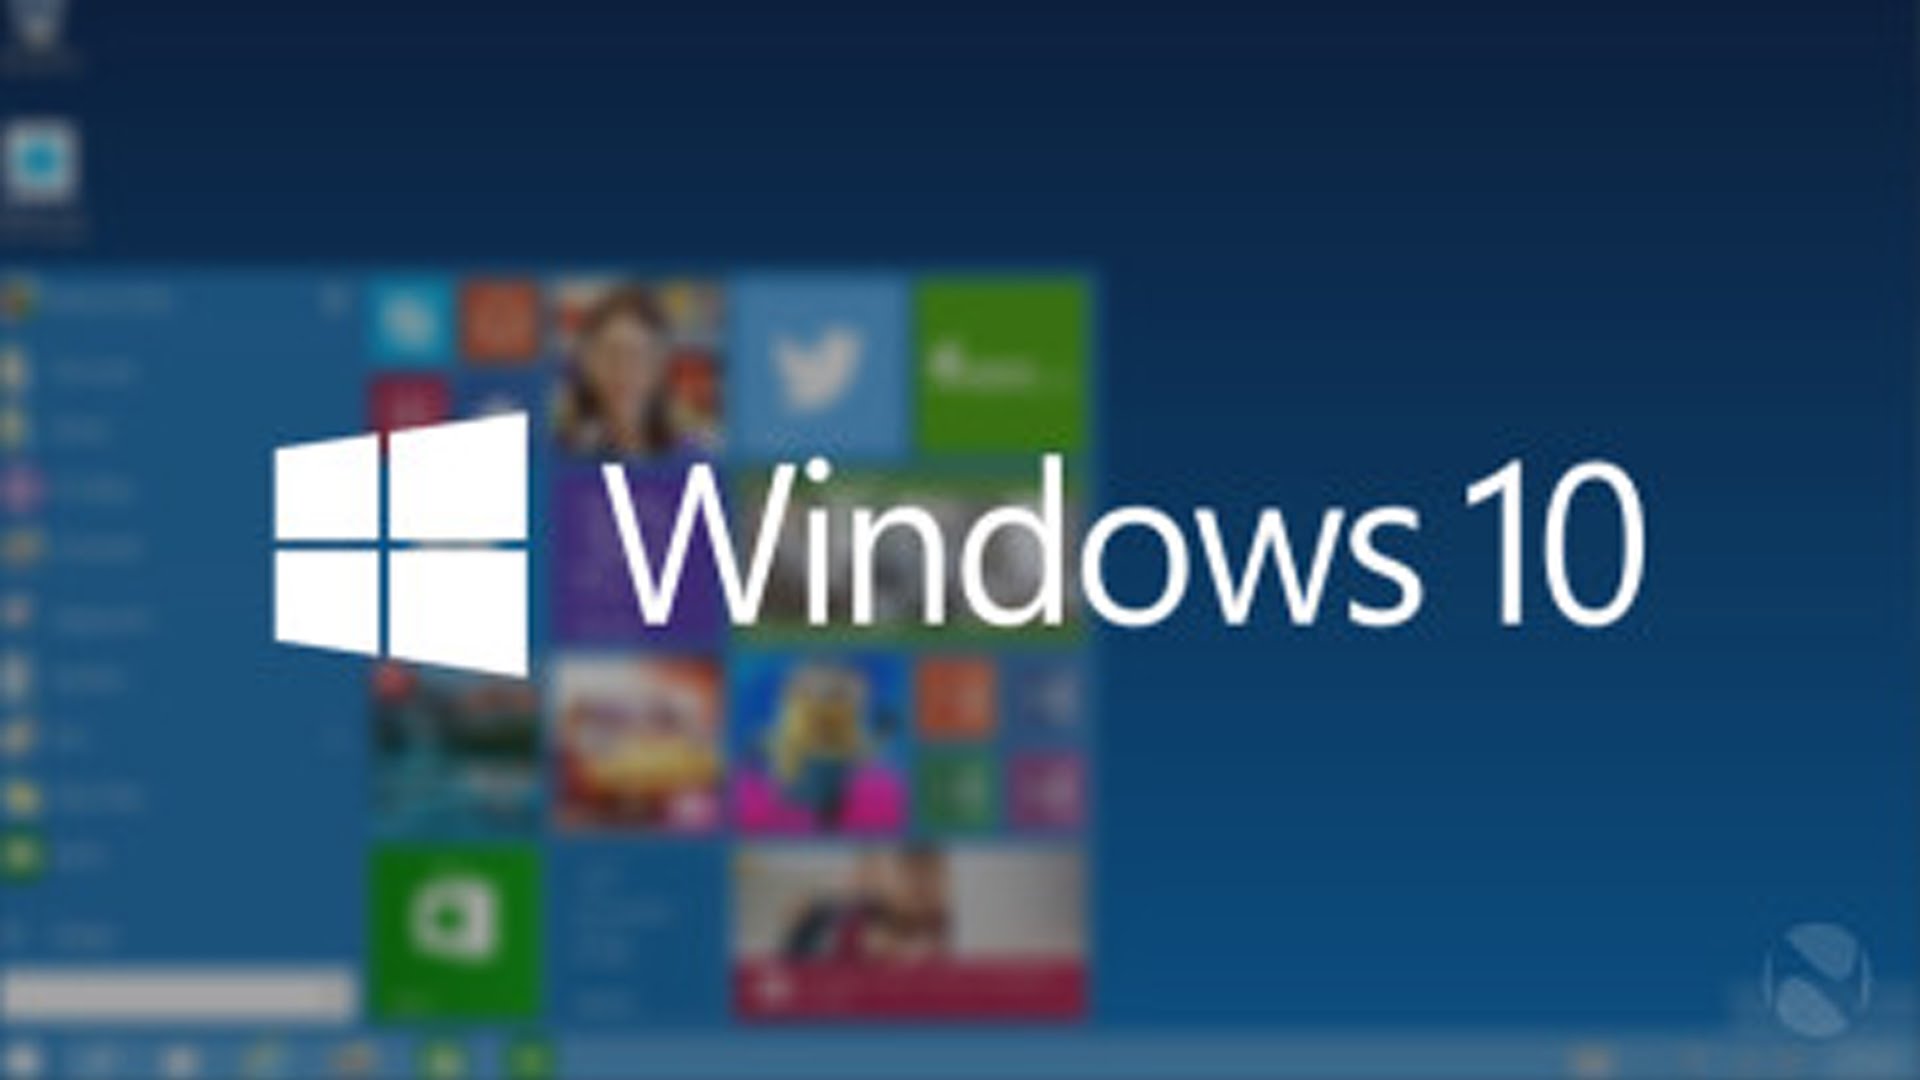 windows 8.1 pre activated iso torrent